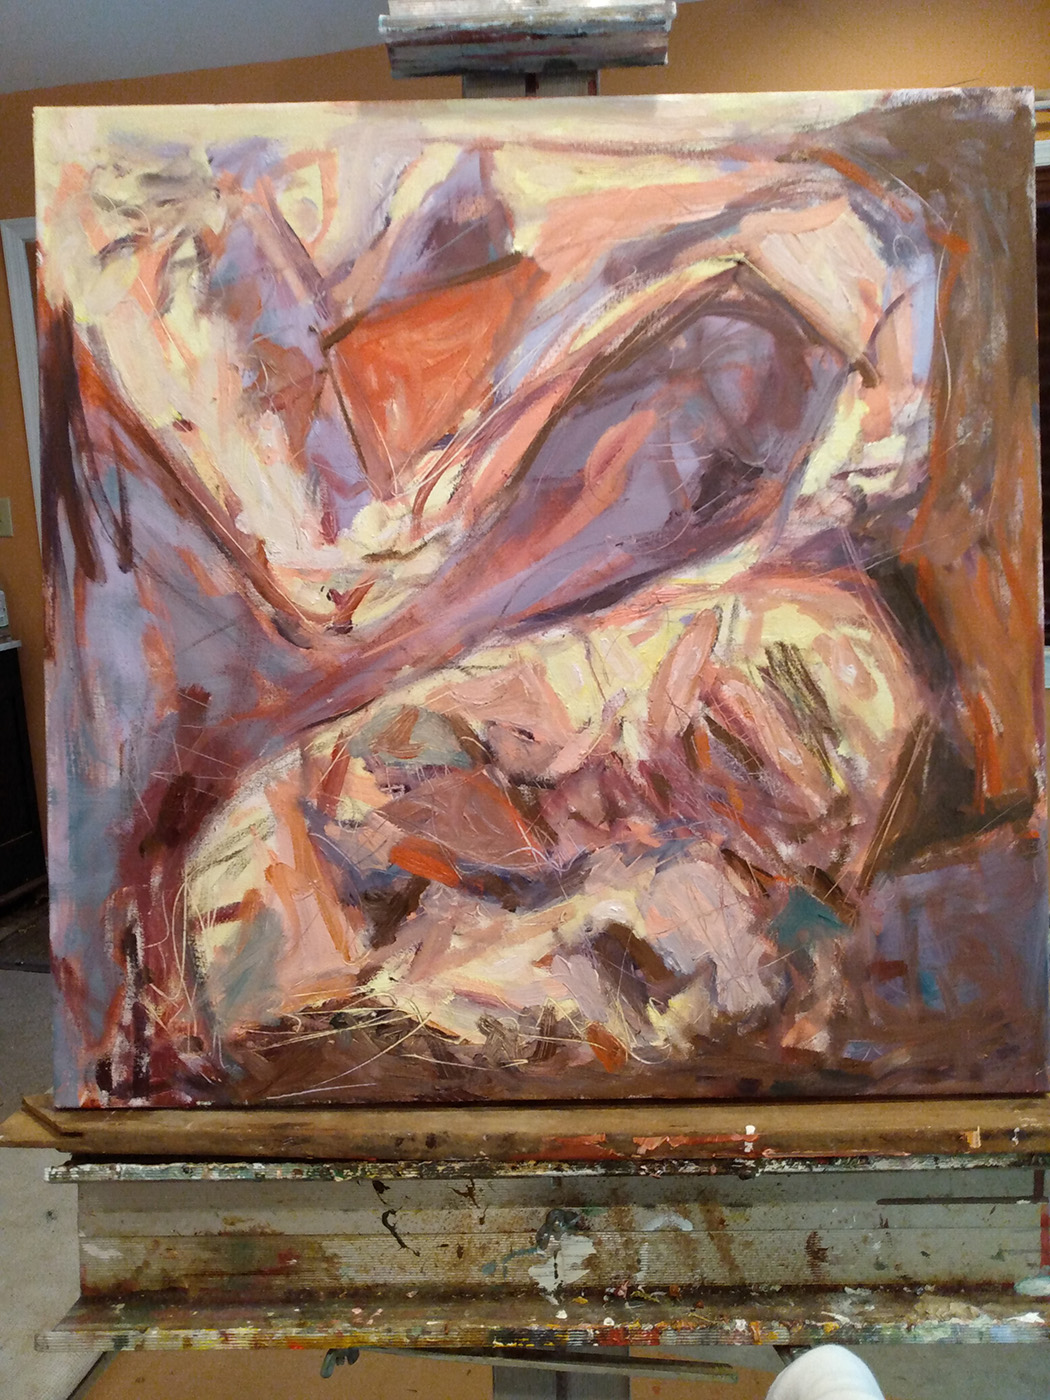 Broken Valley oil painting by Stephen P. Anderson on easel in studio